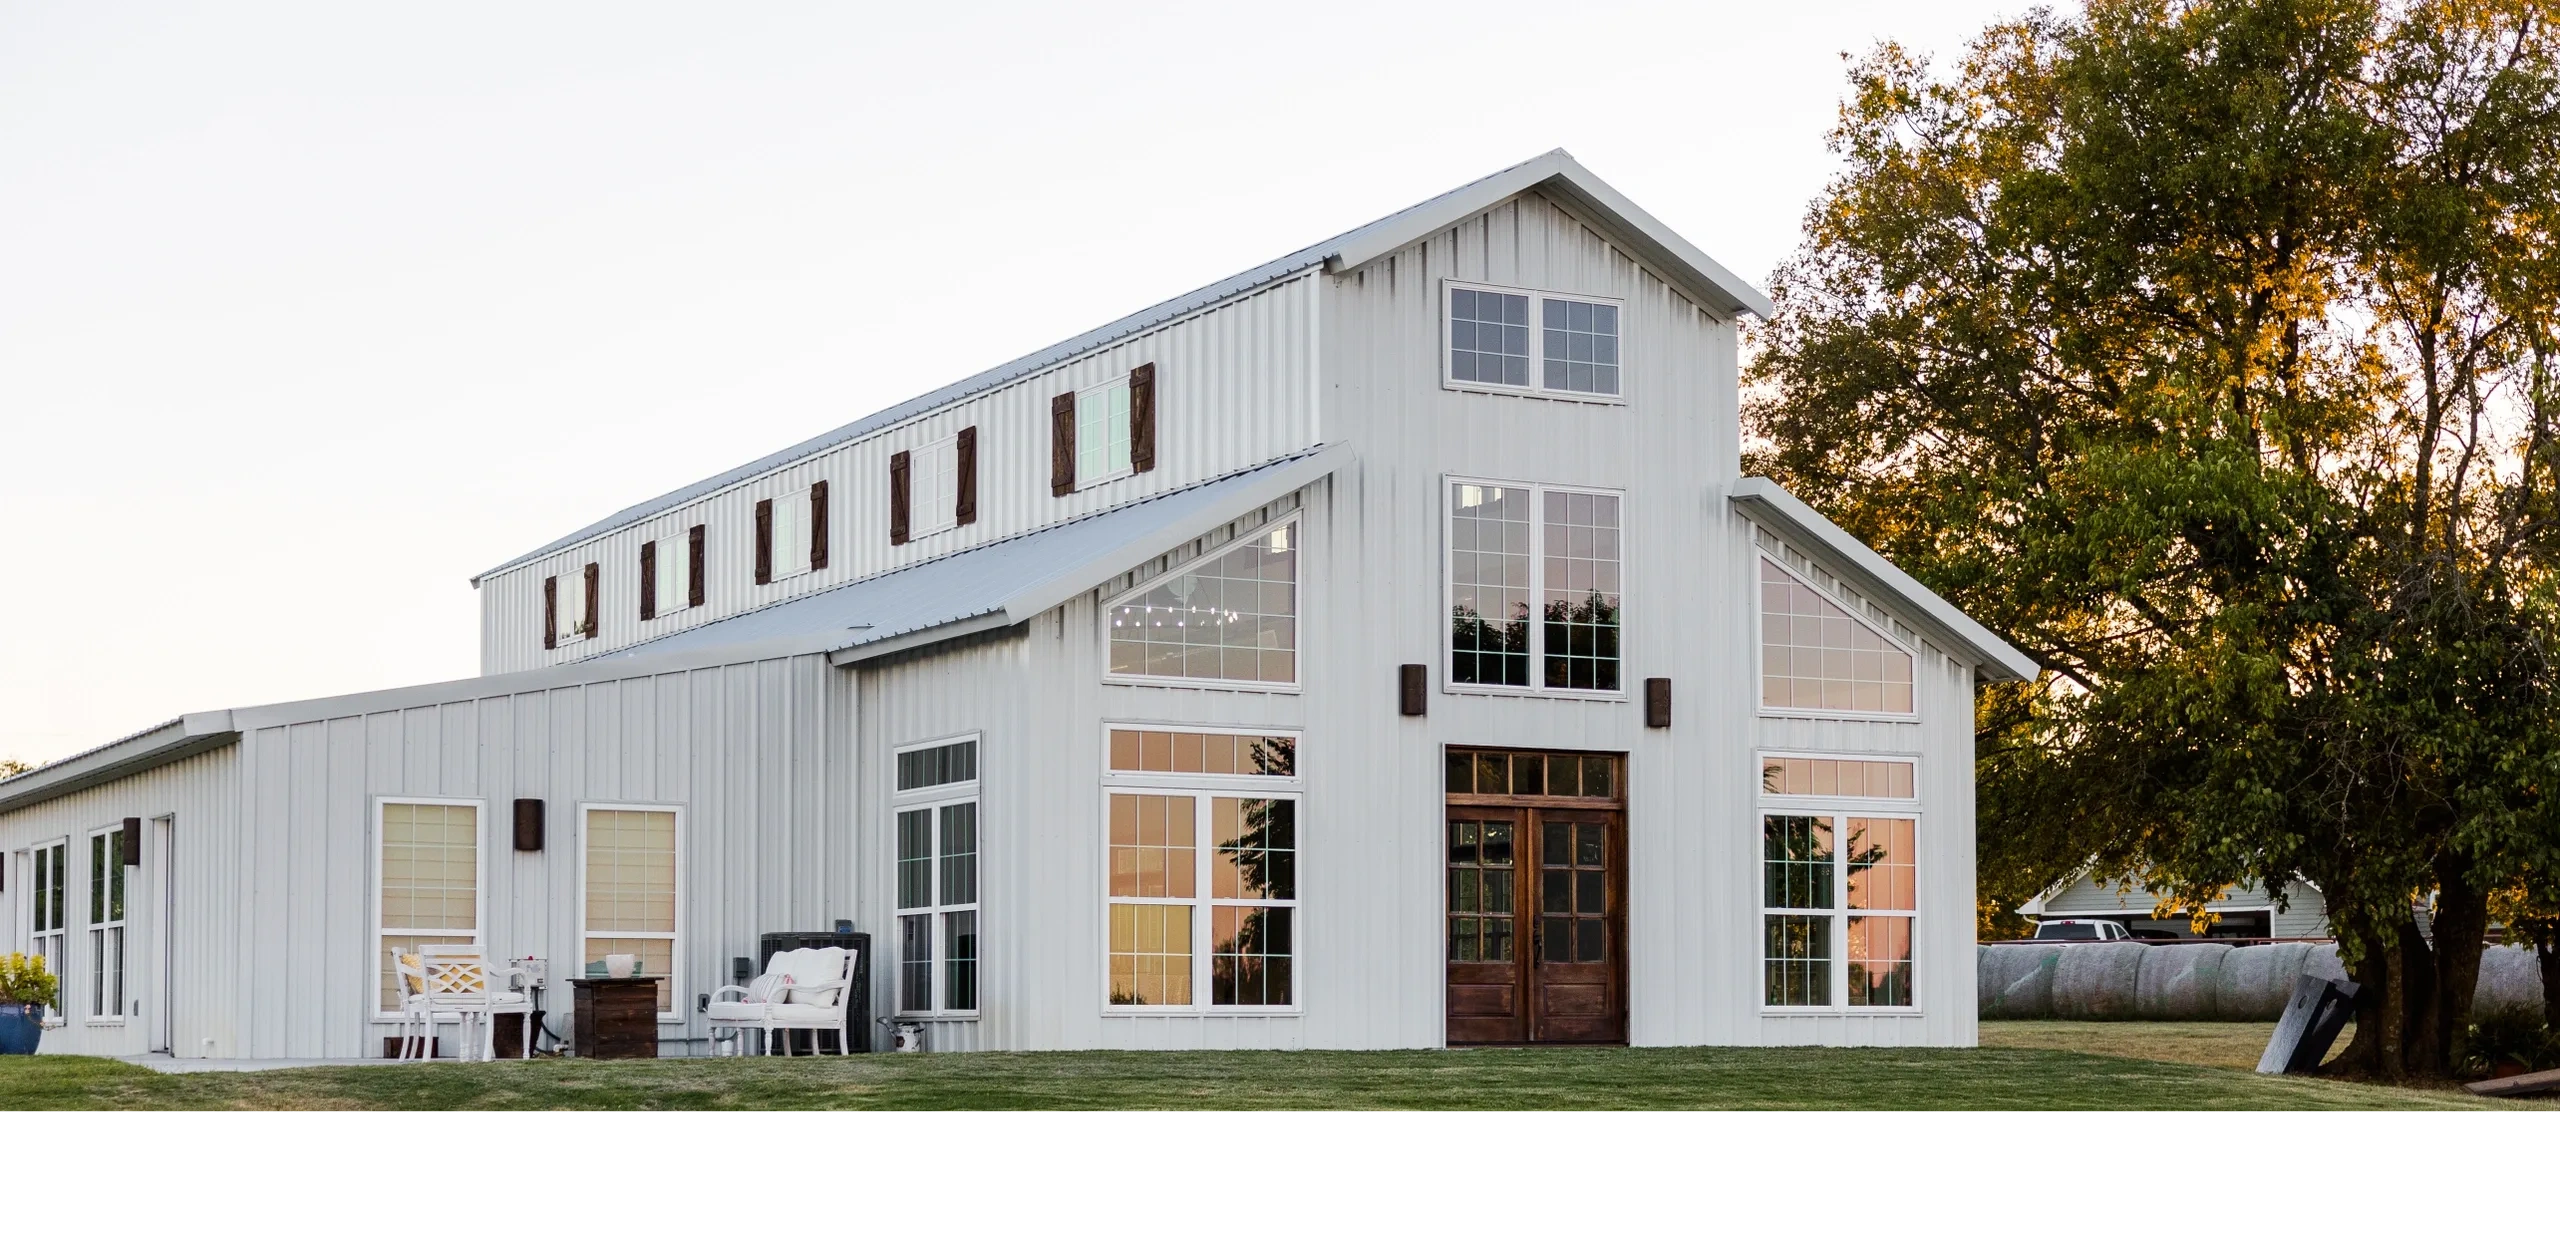 Elegant and rustic white barn venue with stained wood accents and a sunset reflected in the windows